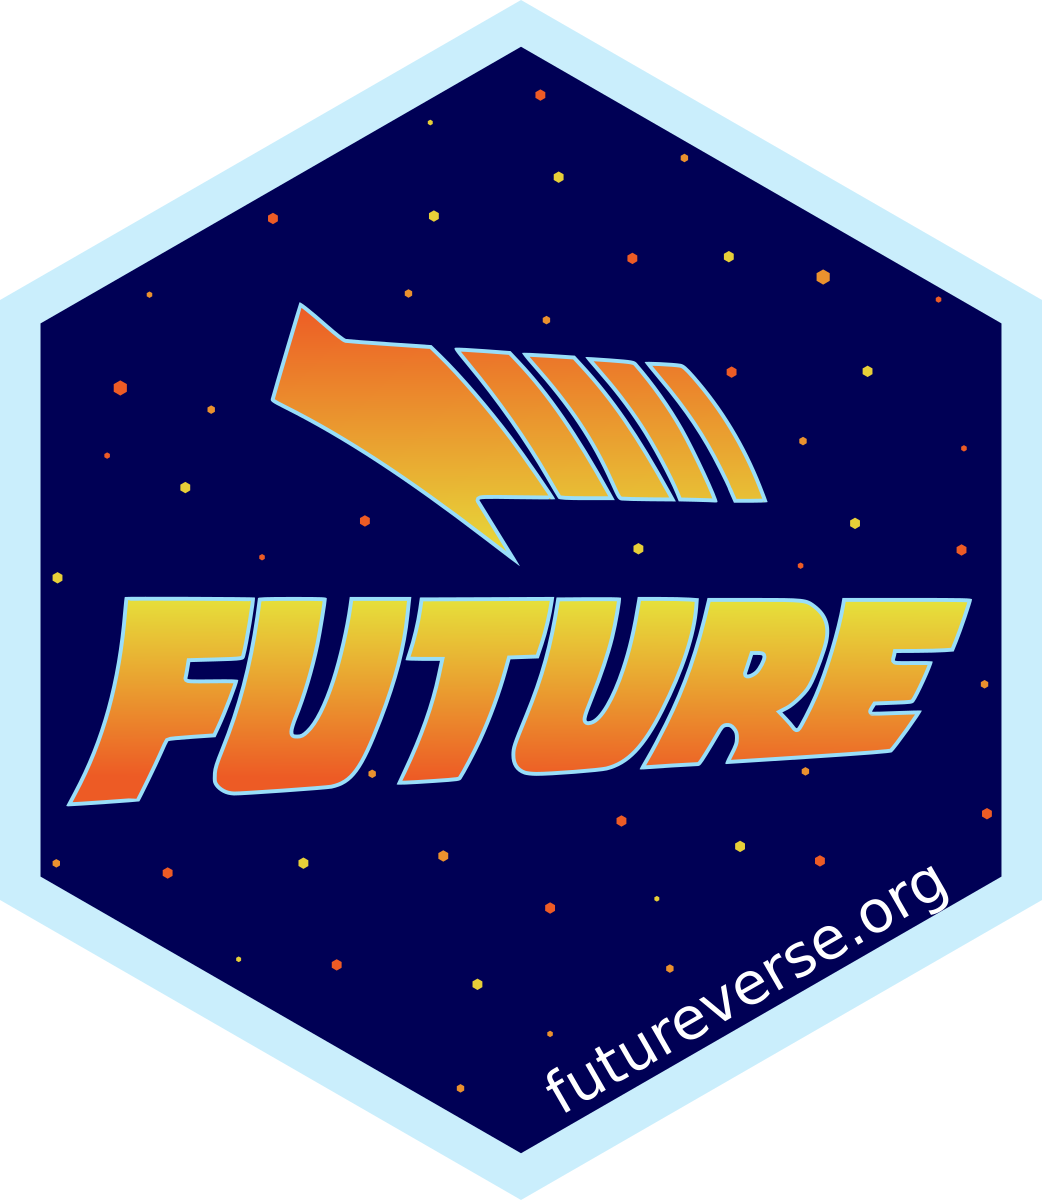 The hexlogo of the future package. A left-facing arrow with the text future underneath - both in bold style filled with yellow-to-orange vertical gradient. The background is dark blue with teeny star-shaped symbols in distance resembling looking deep out in the universe. The hexlogo is surrounded by a light-blue border.